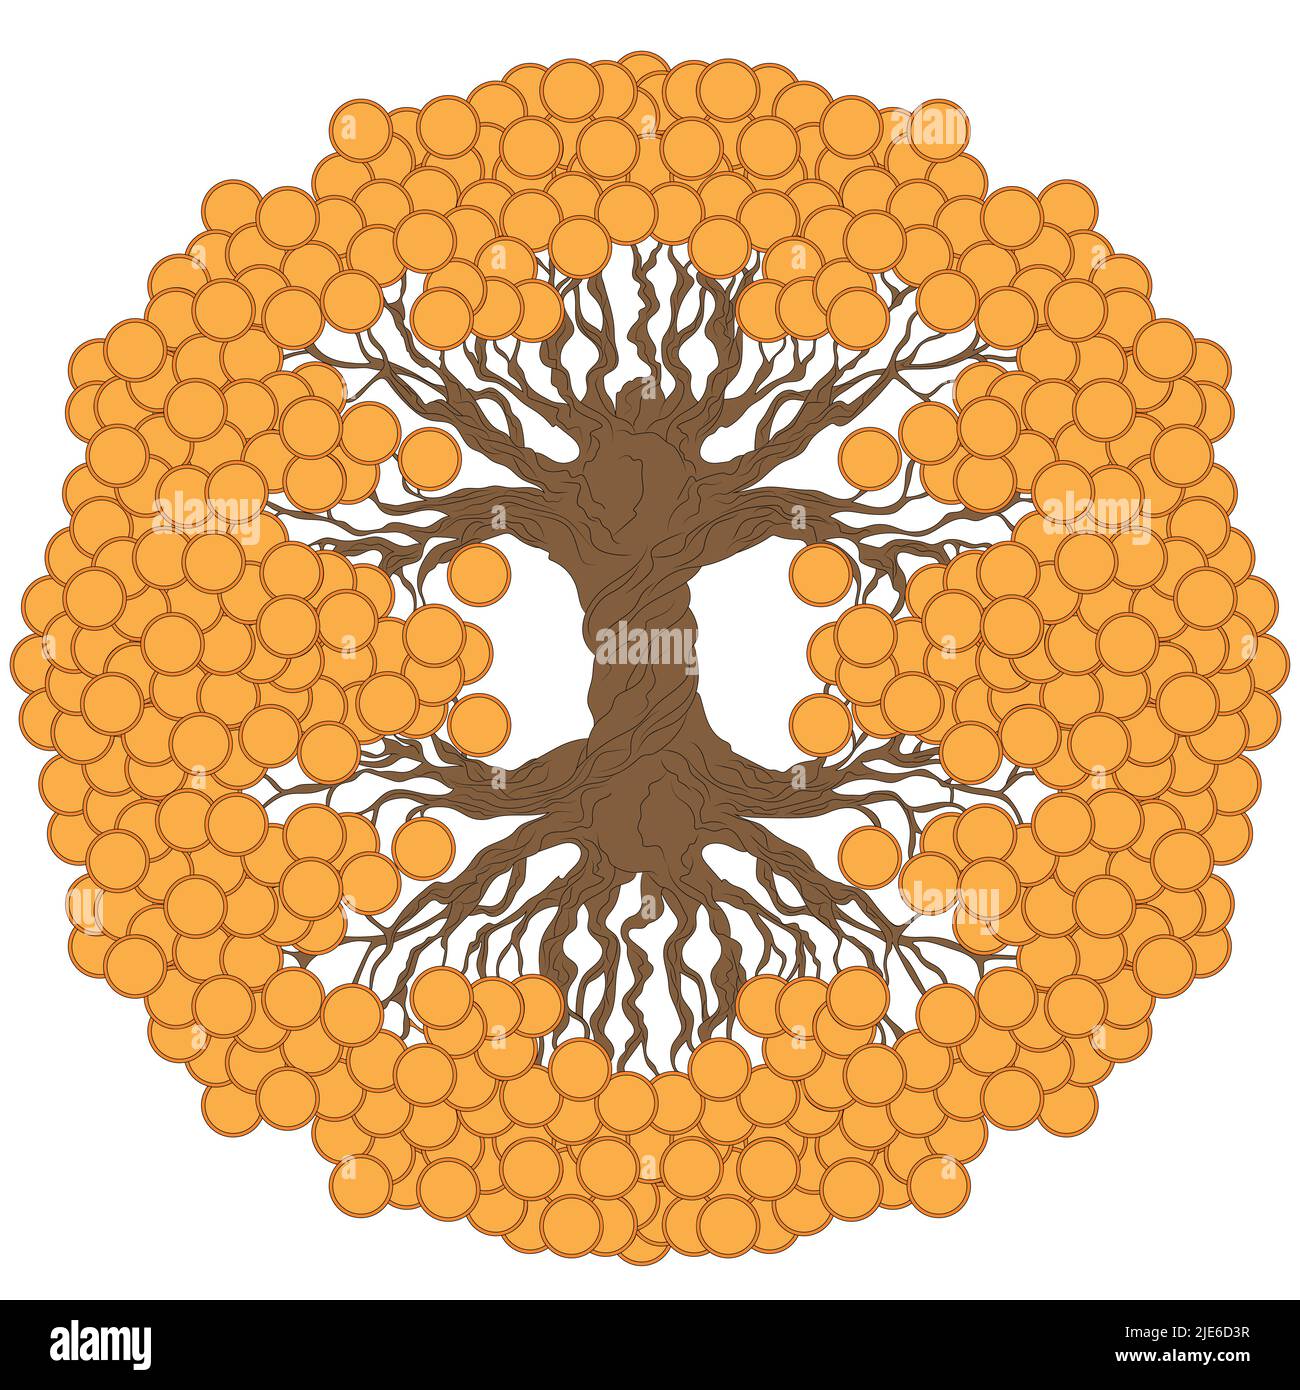 Money tree with coins. A traditional feng shui symbol for attracting wealth and prosperity. Color illustration. Stock Vector